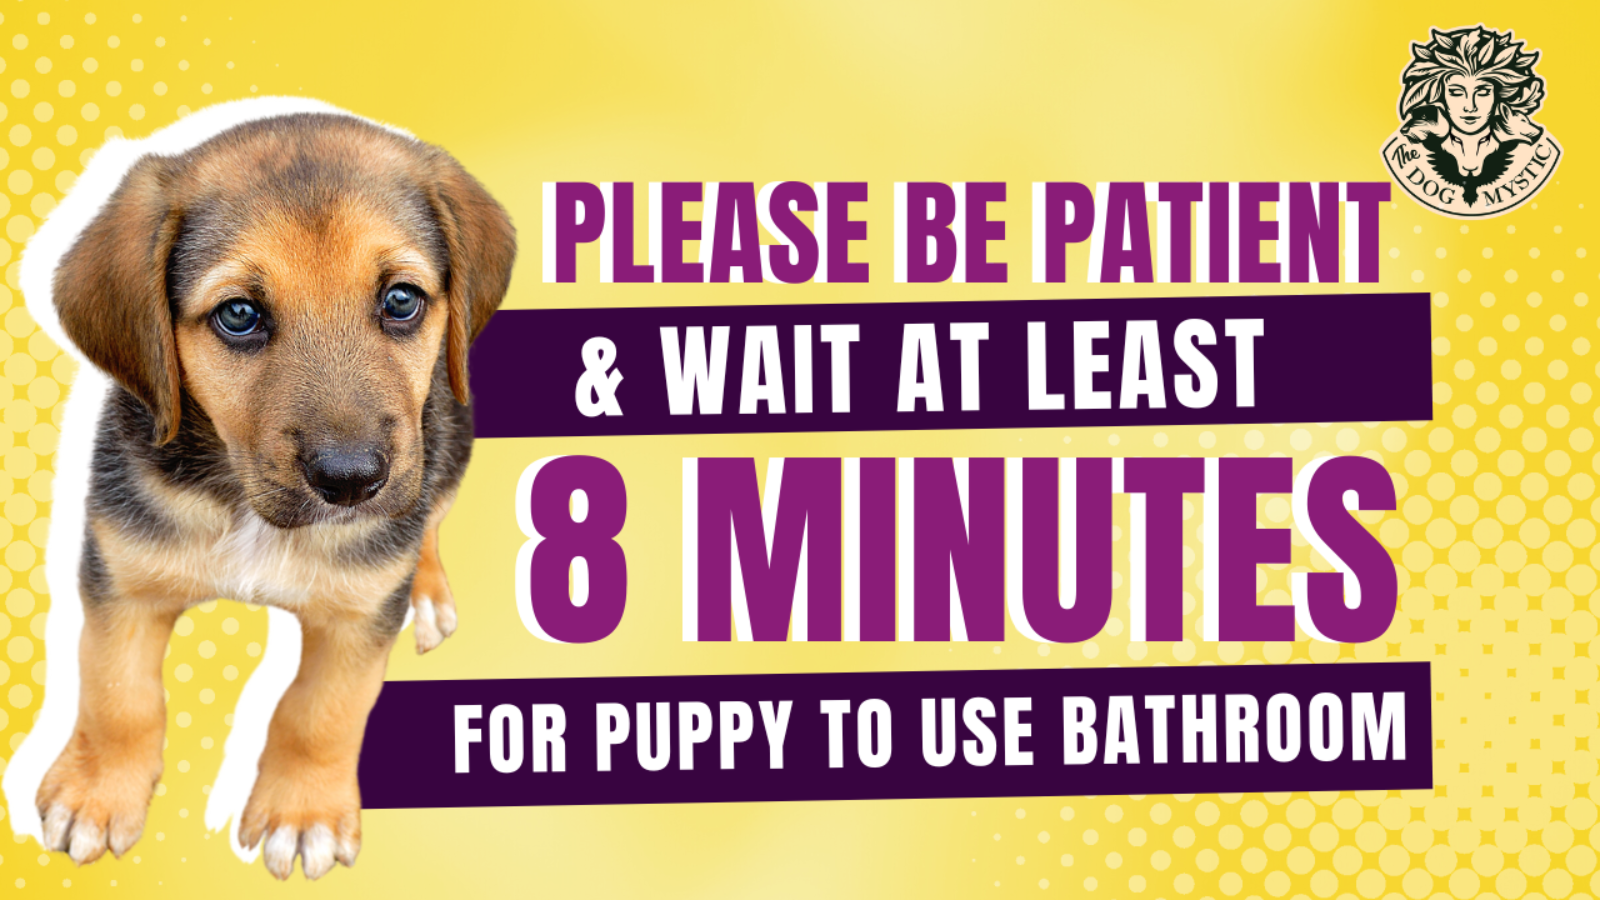 Please Be Patient & Wait At Least 8 Minutes For Your Puppy To Use The Bathroom!